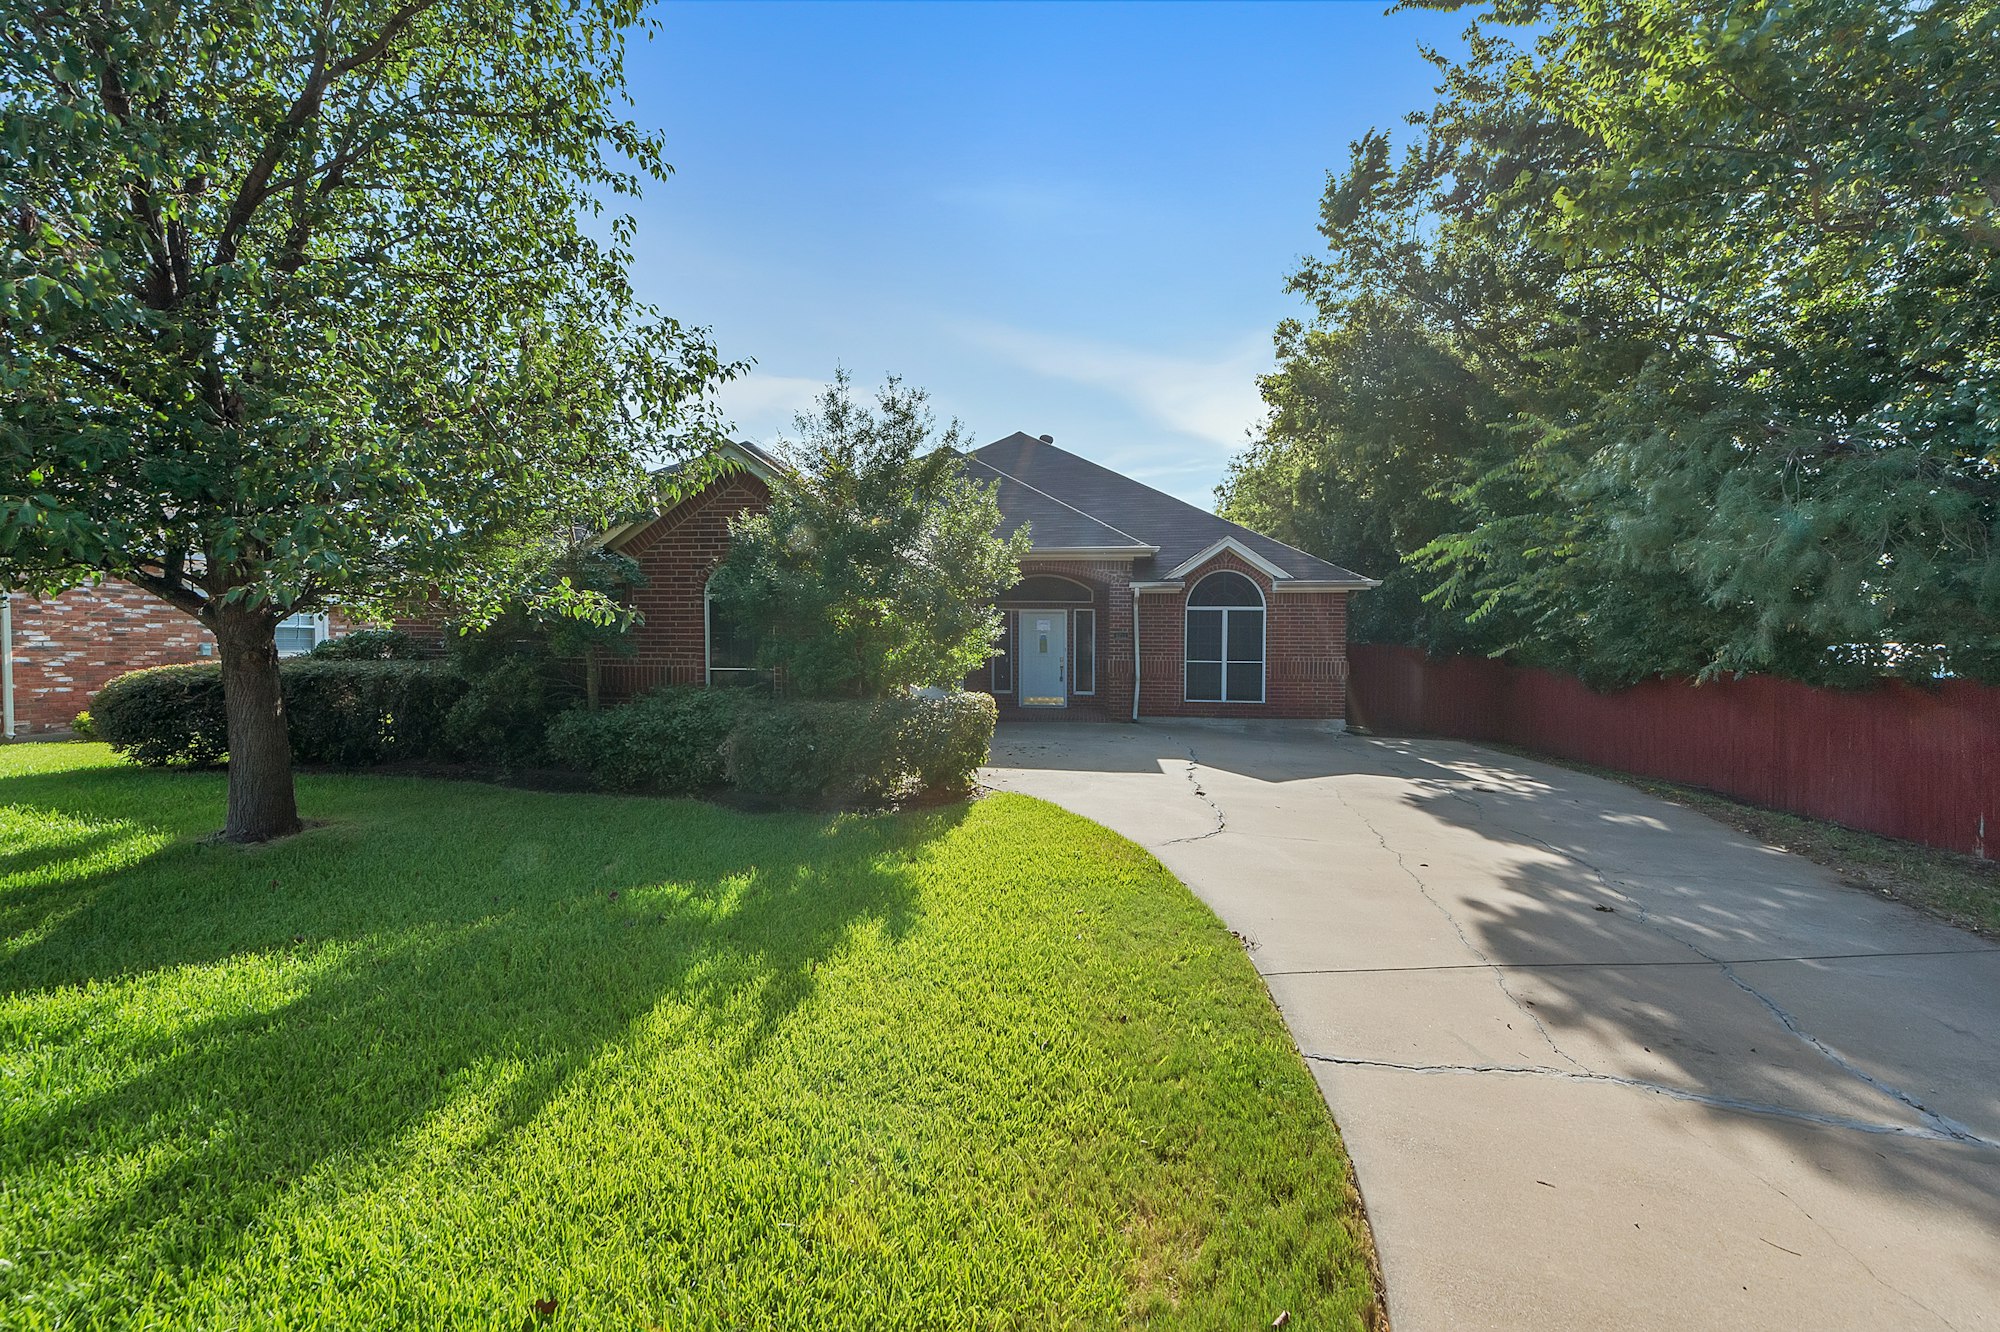 Photo 1 of 26 - 6775 Brittany Park Ct, North Richland Hills, TX 76182